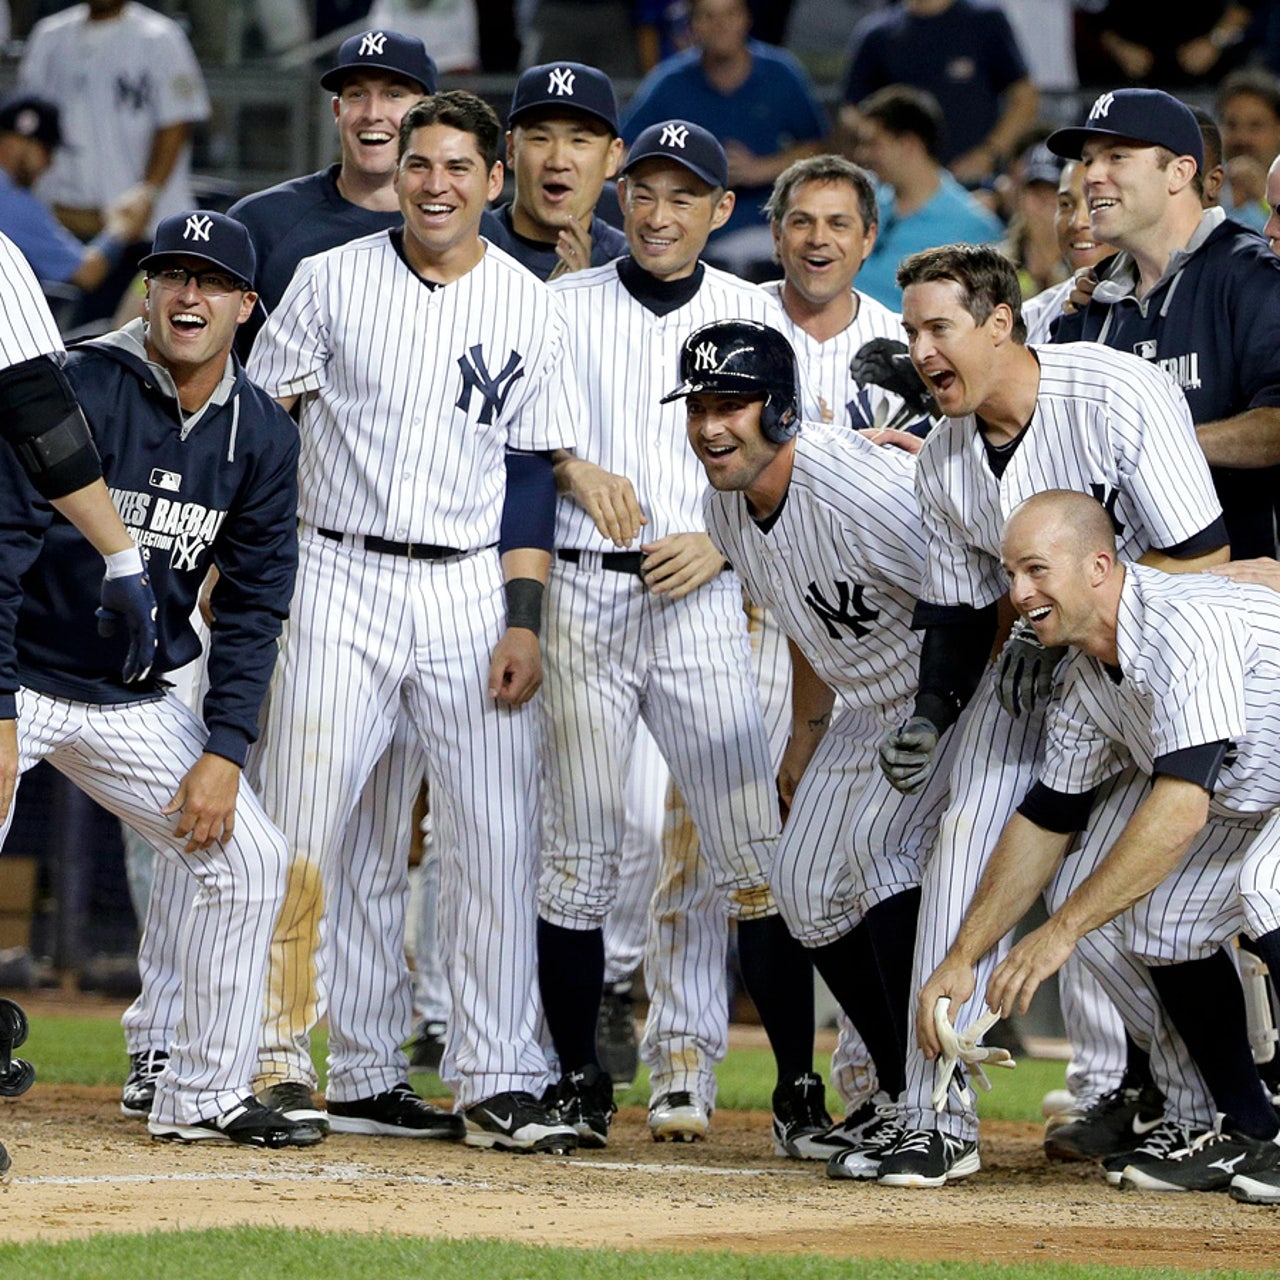 Walkoff homer leads White Sox over Yankees in Field of Dreams game